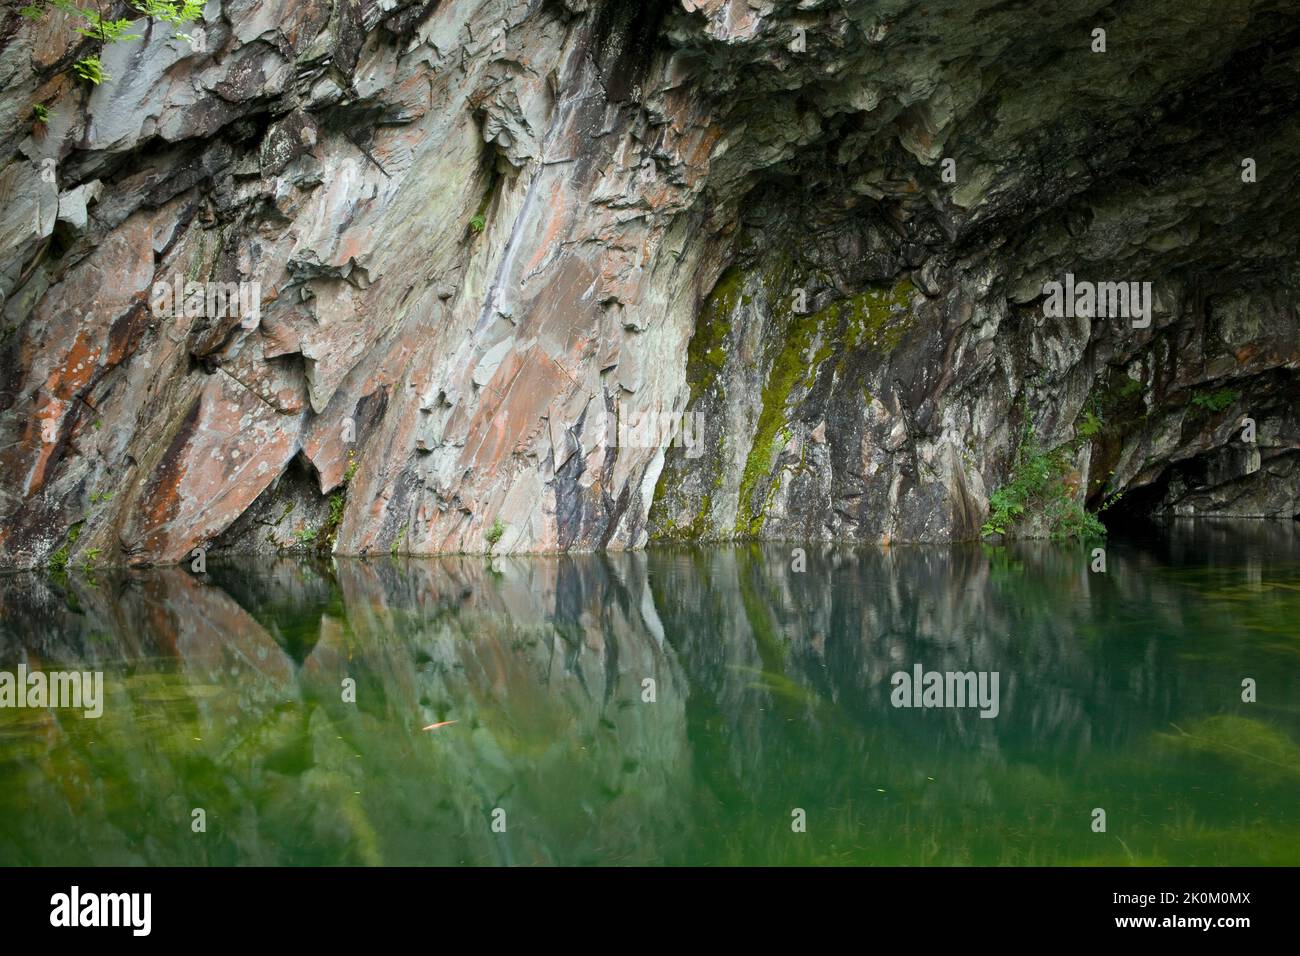 Slate reflected in the waters of a cave, part of a disused quarry, by Rydal Water in the Lake District, England, UK Stock Photo